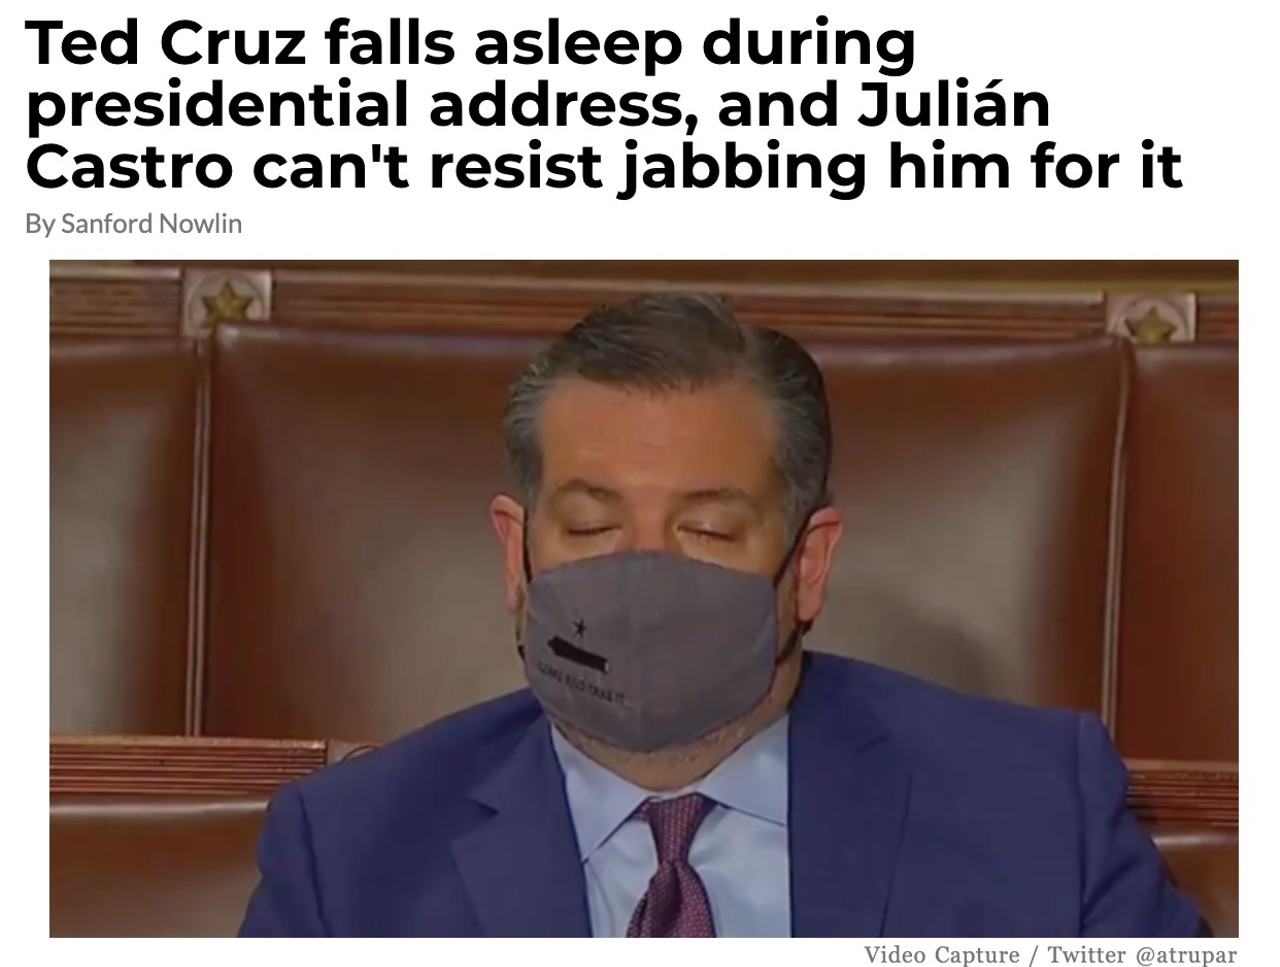 13. Ted Cruz falls asleep during presidential address, and Julián Castro can't resist jabbing him for it